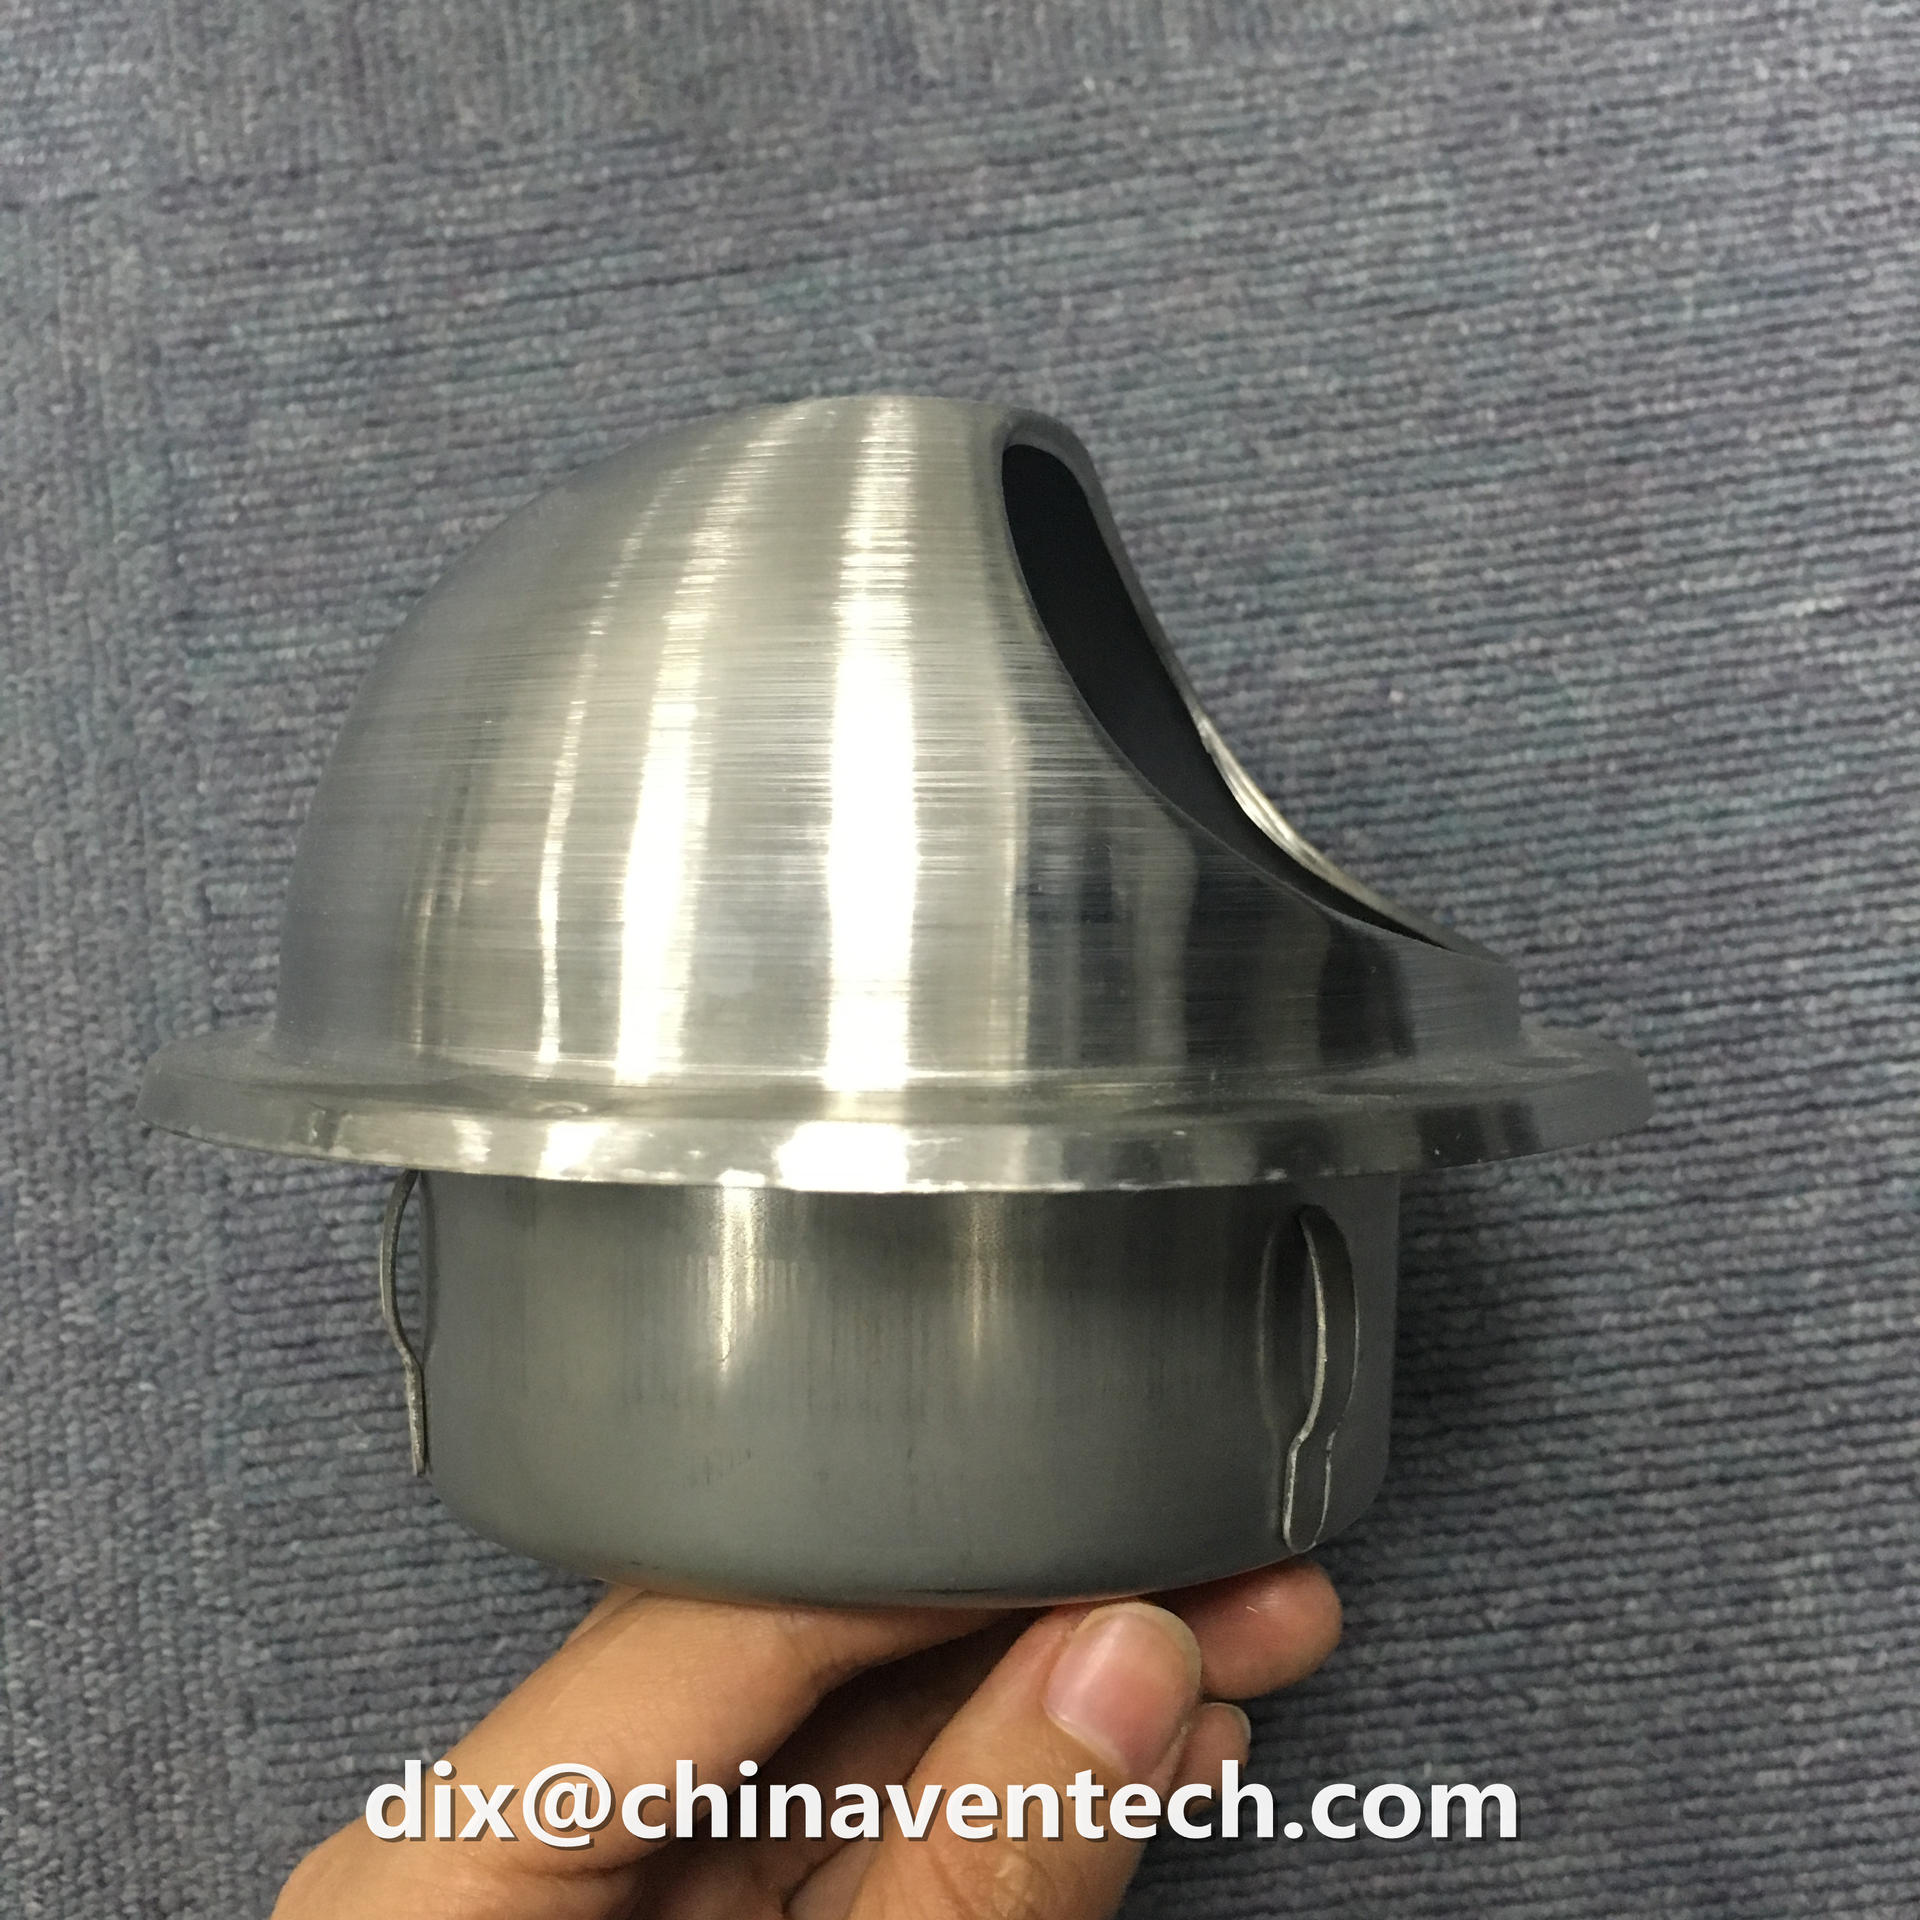 HVAC system type stainless steel air vent cover ball shaped weather louver